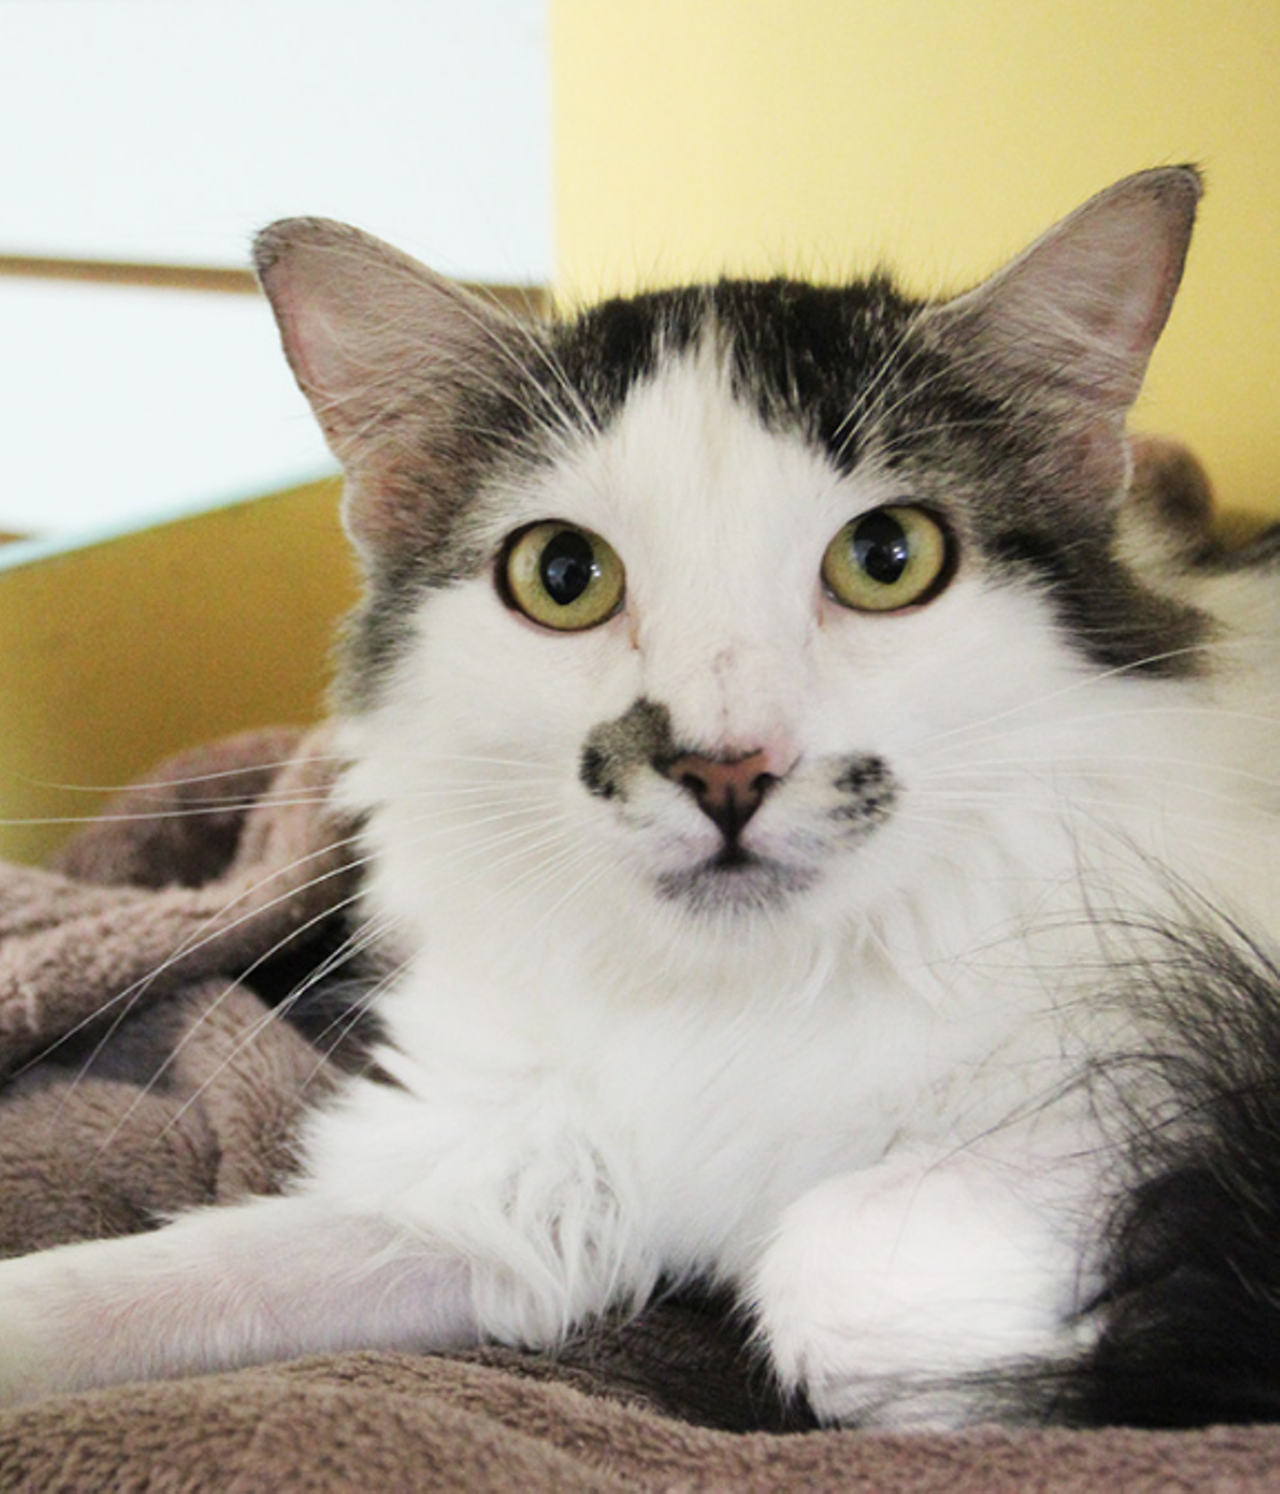 Sabrina
"Hi, I’m Sabrina! I’m a sweet and friendly girl with a fluffy tail. I enjoy pets on the head and am looking for a loving home where I can relax. I would love to be your new kitty friend! Come by and meet me so that we can get to know each other."